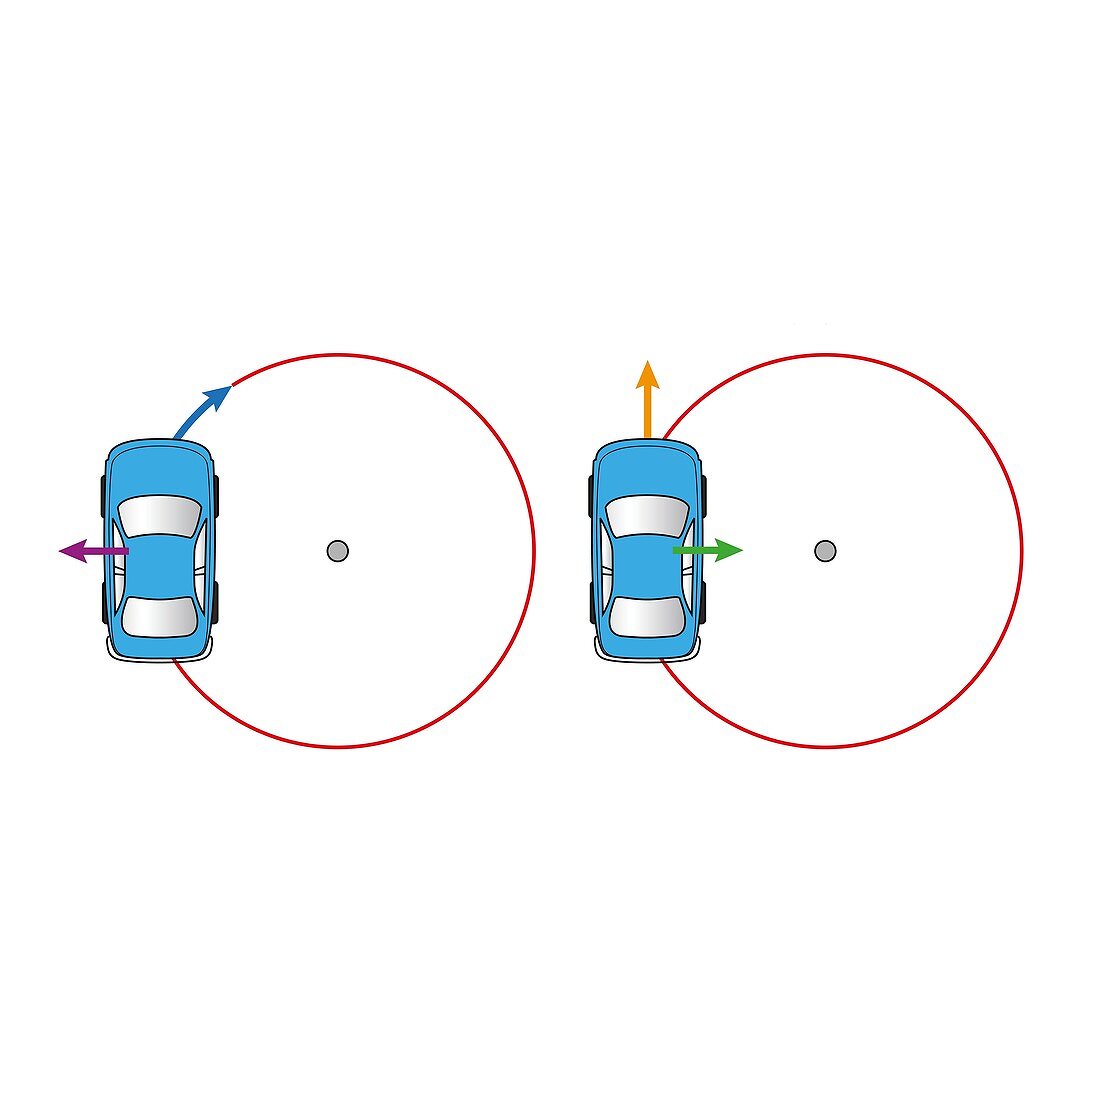 Centrifugal and centripetal forces, illustration